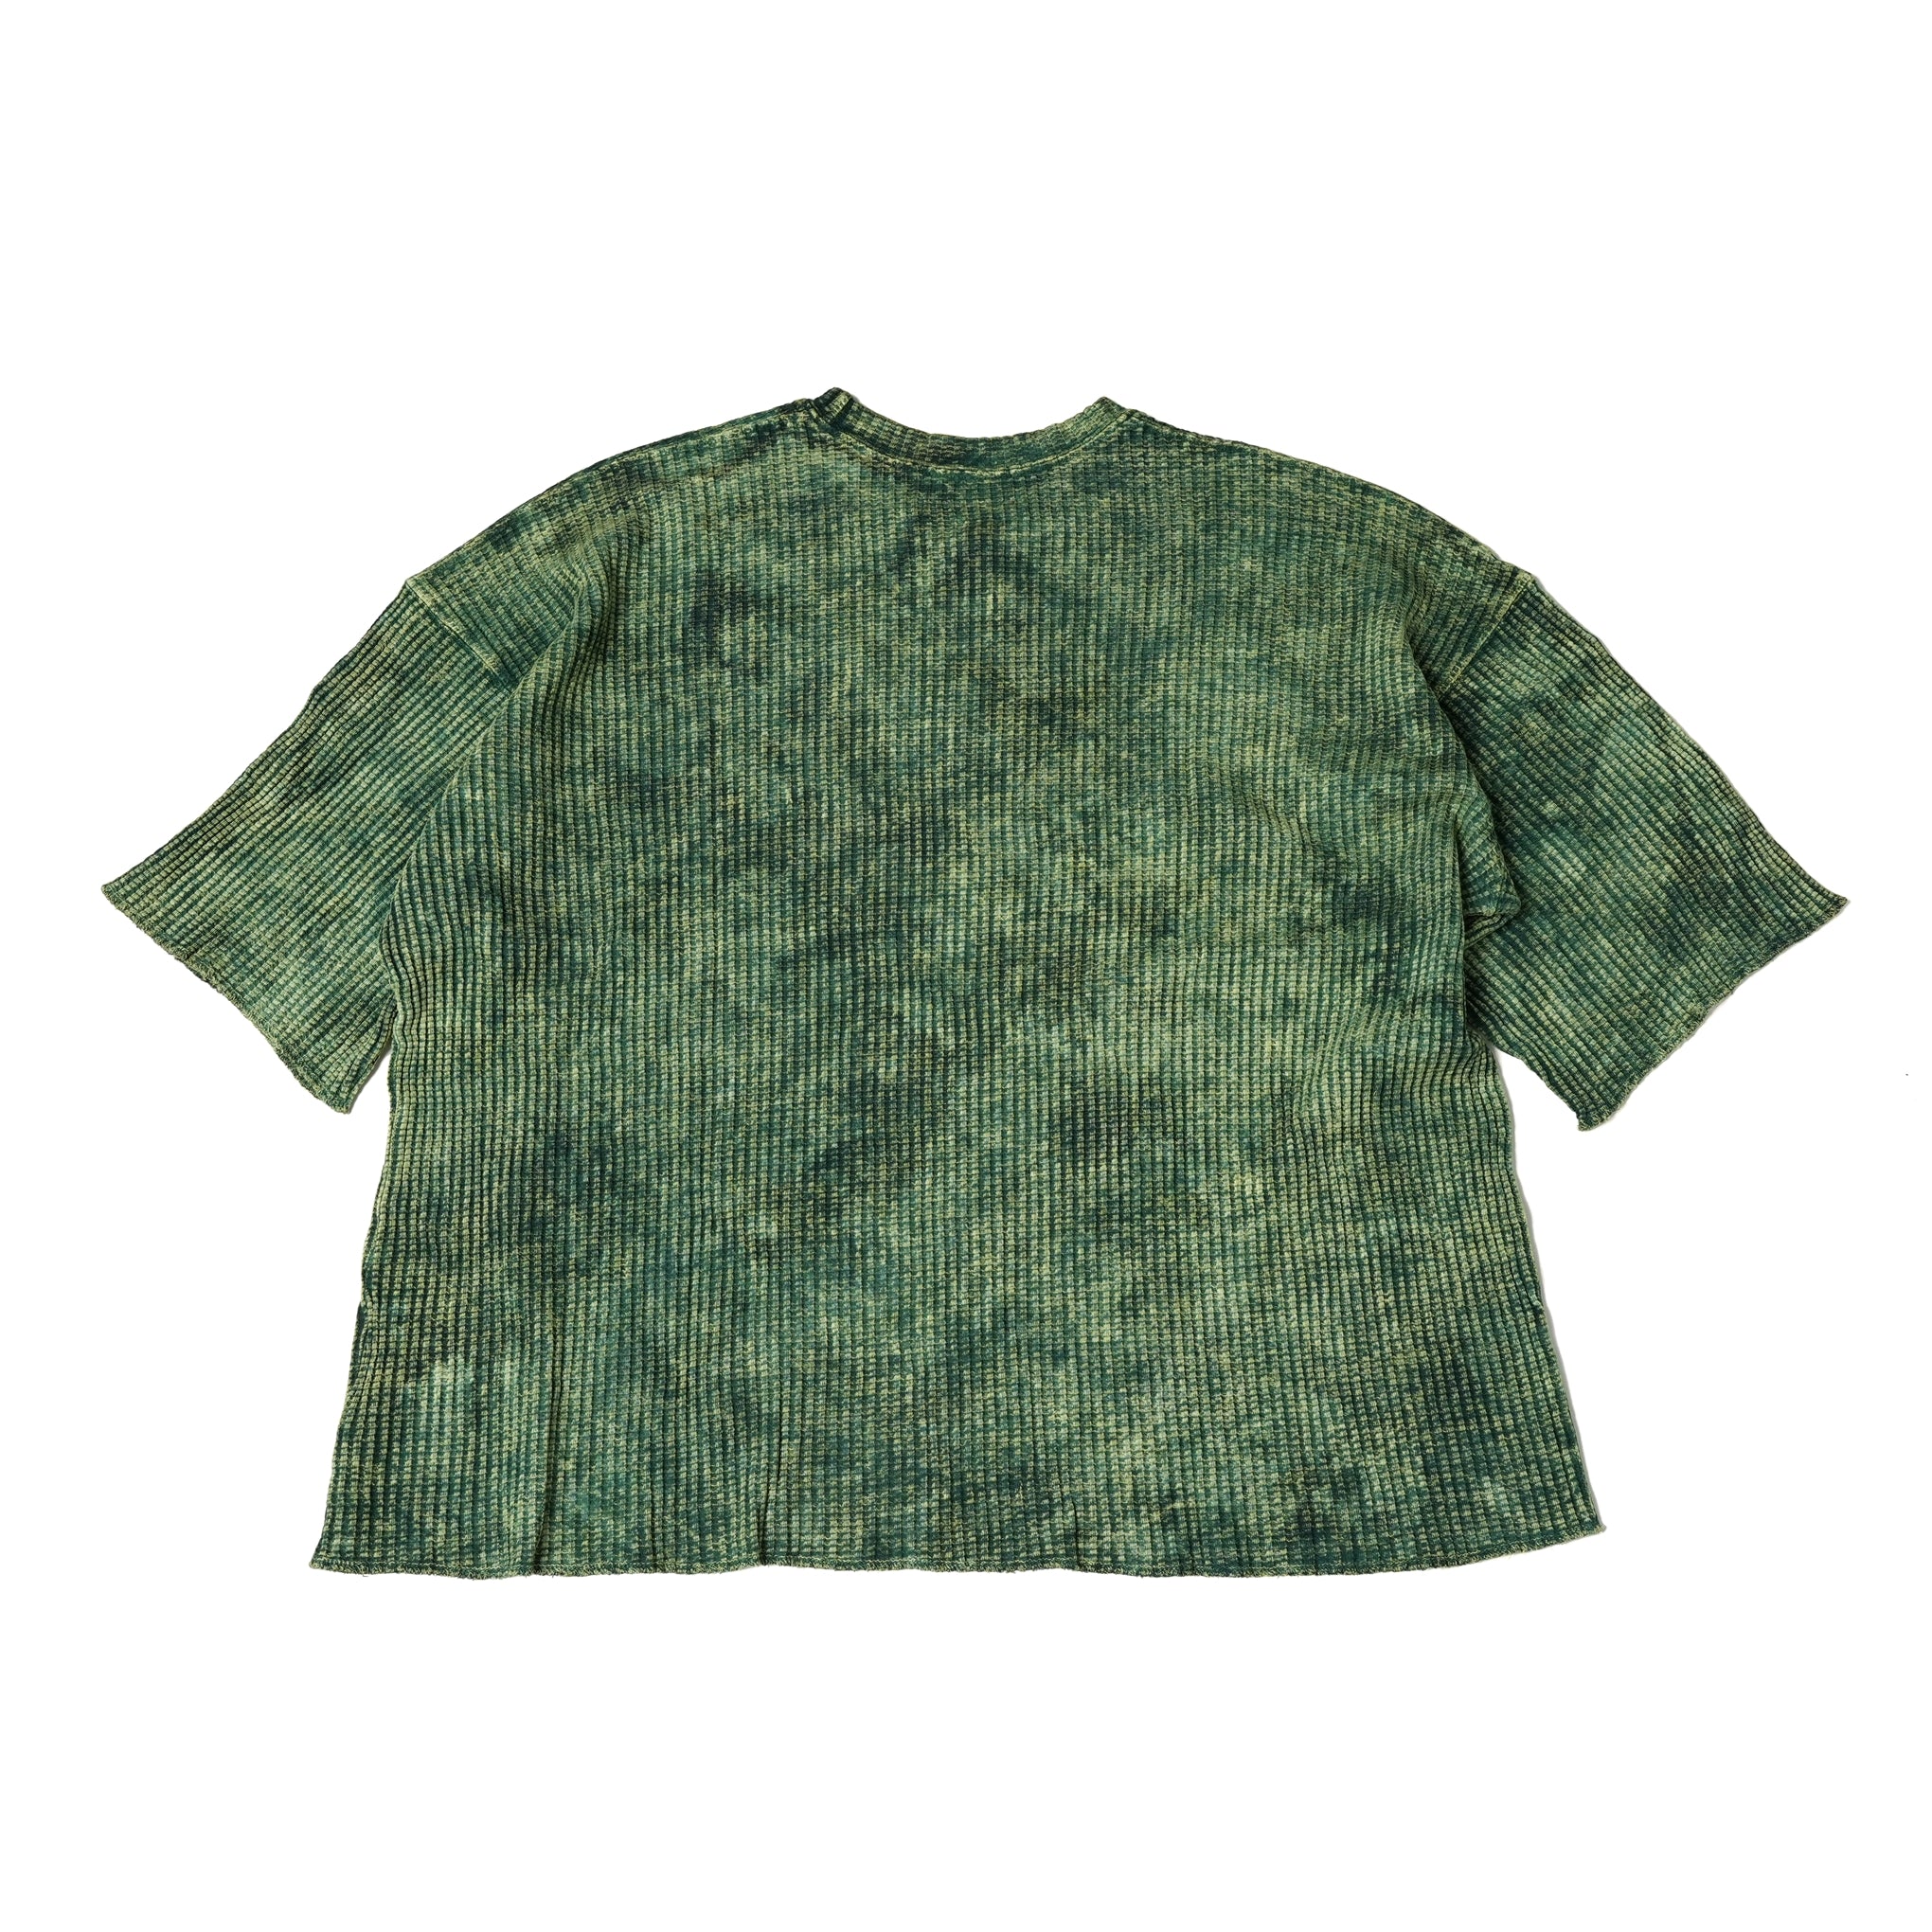 No:M31752-9 | Name:Thermal Cut Off Edges S/S | Color:Tie Dye Midori + Mineral【MONITALY_モニタリー】